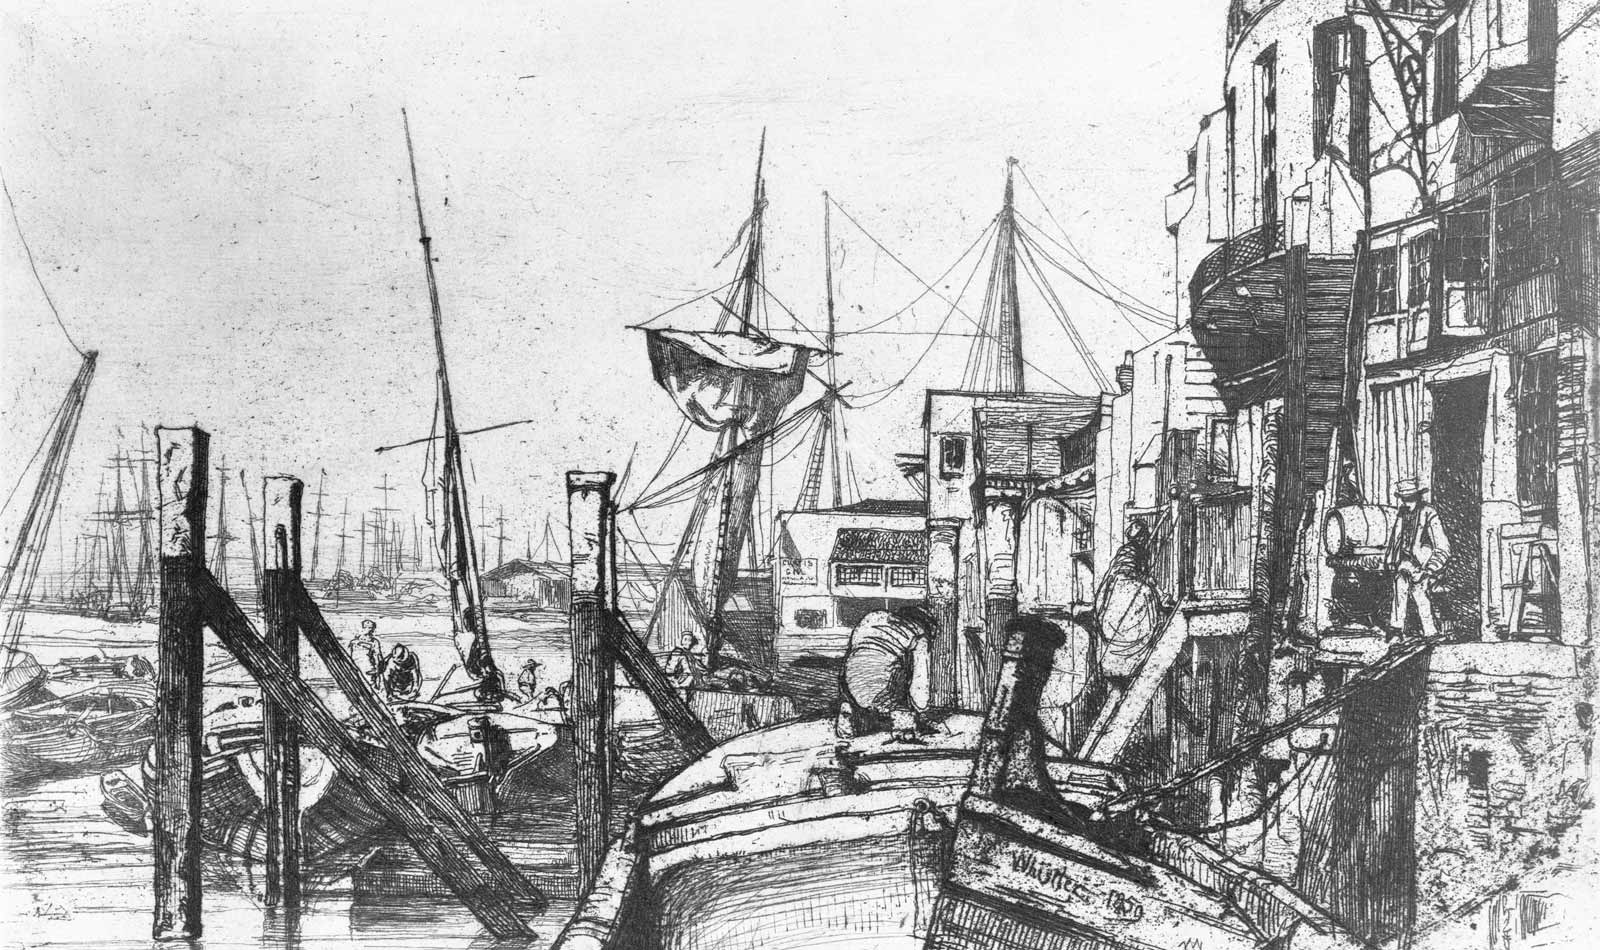 Sketch of the docks at Limehouse, London, mid-19th century.